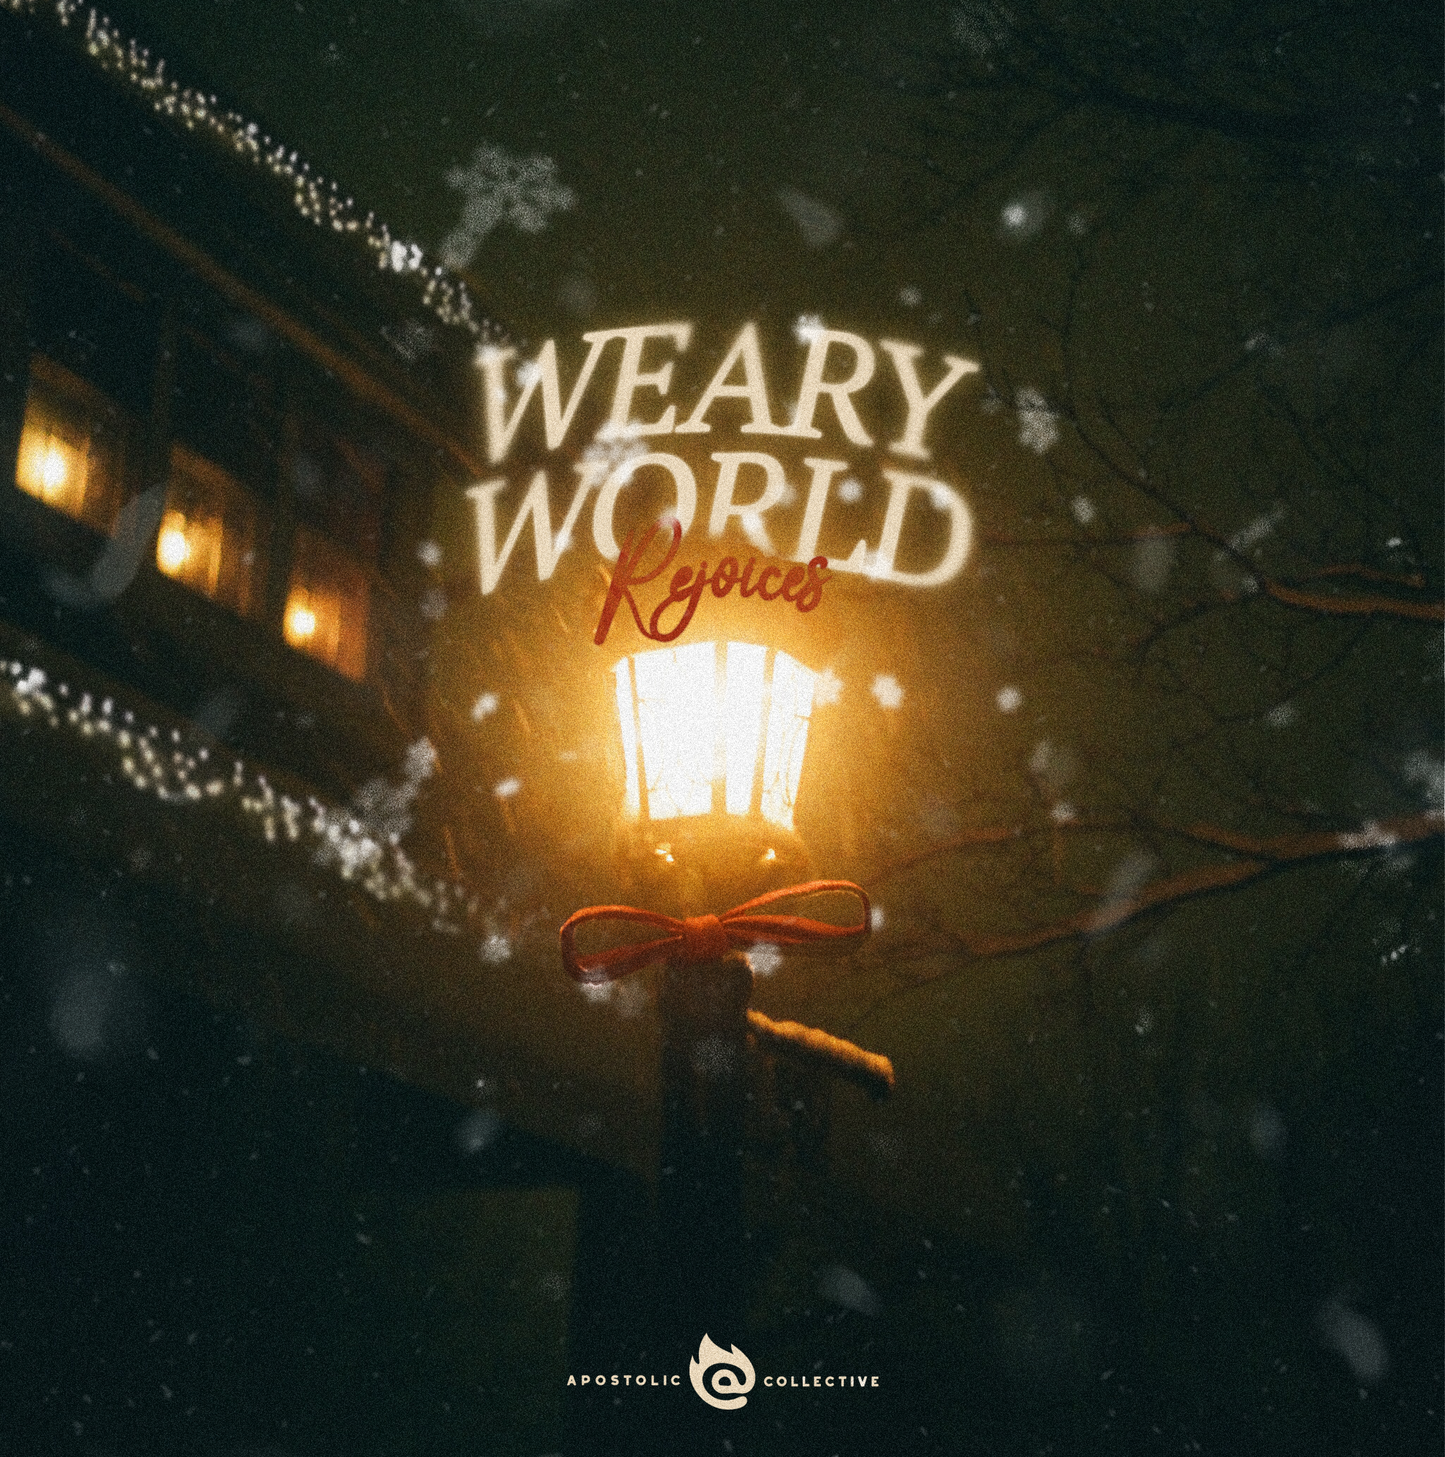 Weary World Rejoices